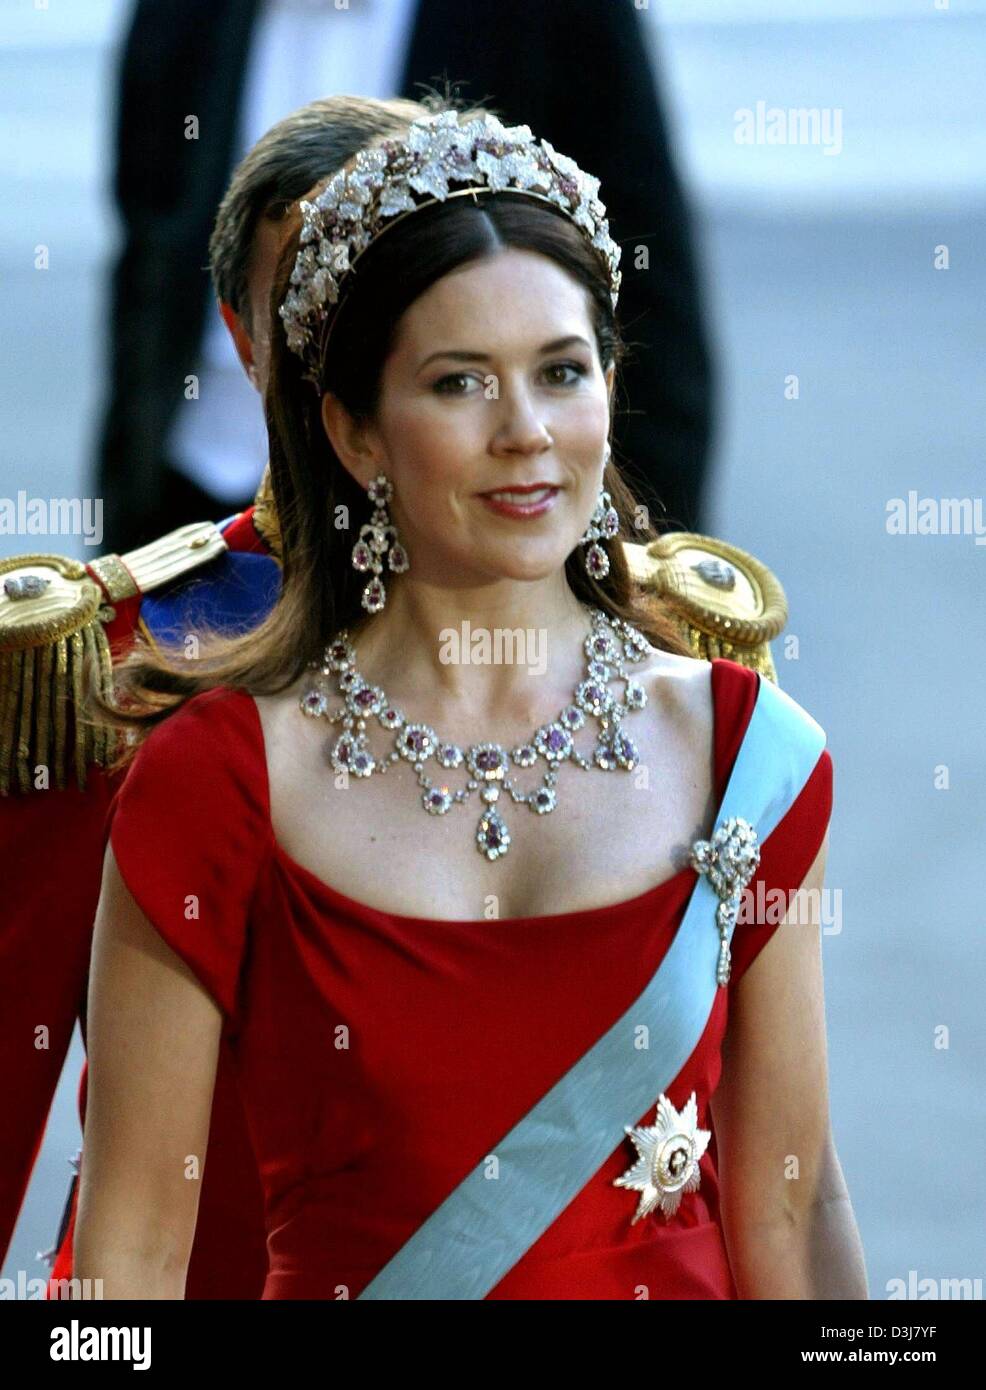 (dpa) - On the eve of her wedding day Mary Donaldson, the Australian fiancee of Crown Prince Frederik of Denmark, arrives for a gala at the Royal Theatre in Copenhagen, Denmark, 13 May 2004. Stock Photo